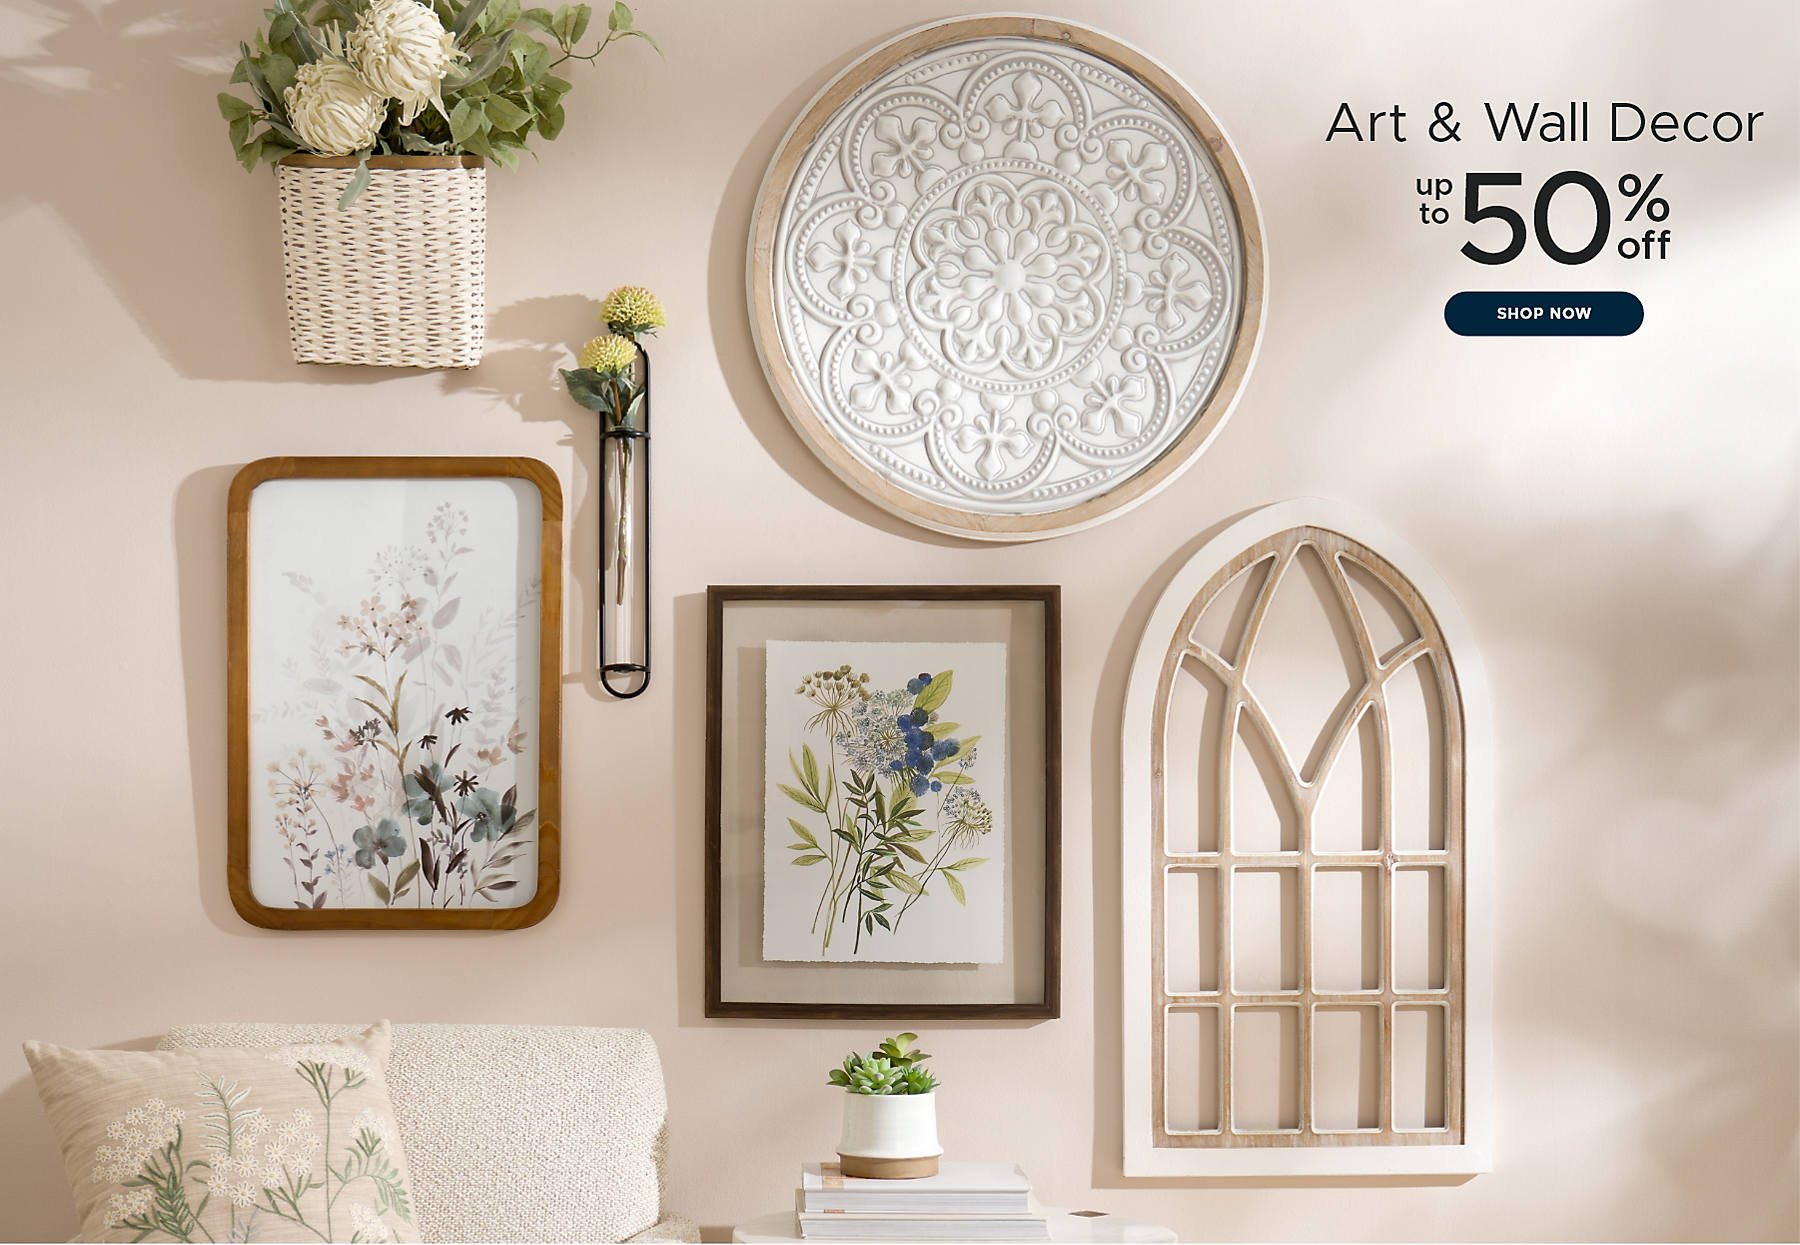 Art & Wall Decor up to 50% off shop now